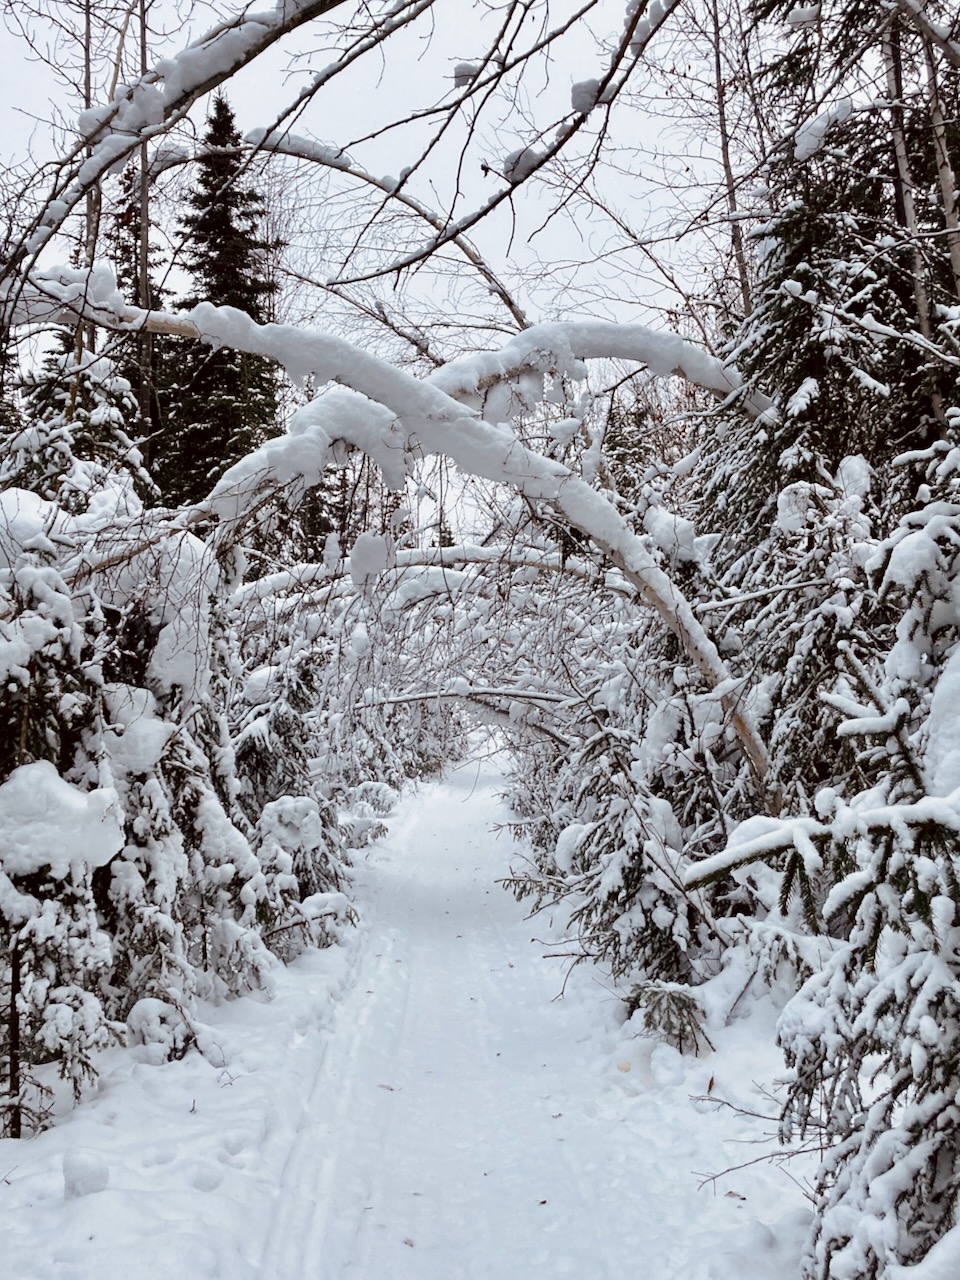 In a Fairbanks winter, snowy trees lines a snowmachine path.